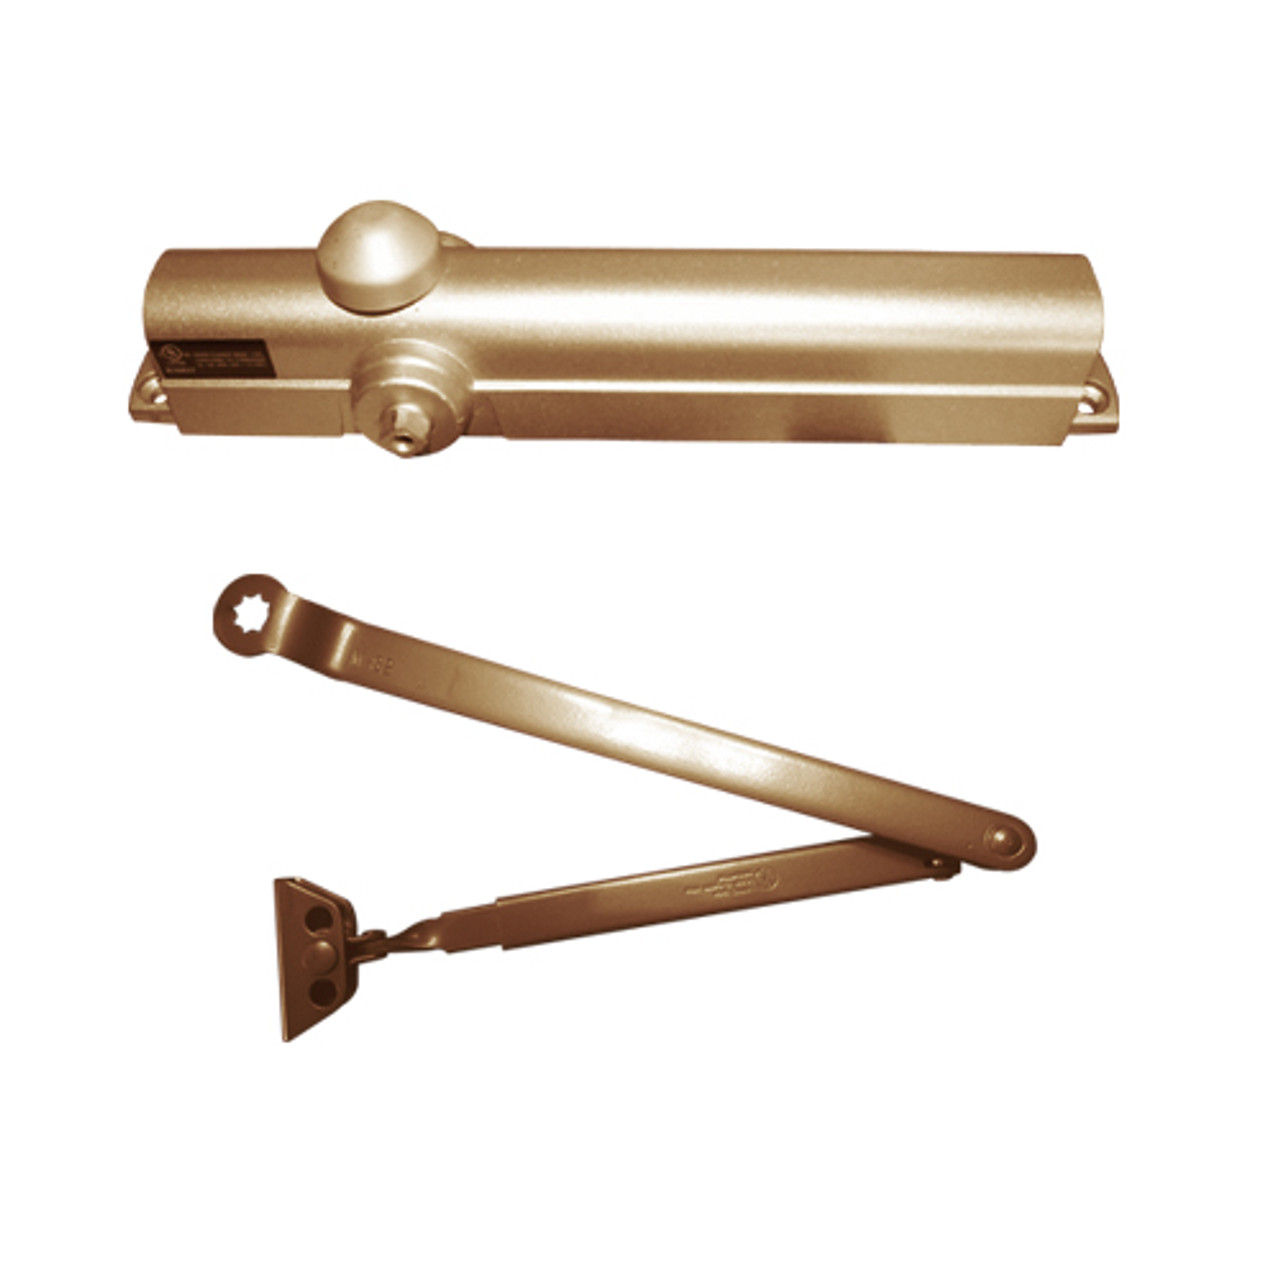 8101DA-691 Norton 8000 Series Non-Hold Open Door Closers with Regular Parallel and Top Jamb to 3 inch Reveal in Dull Bronze Finish